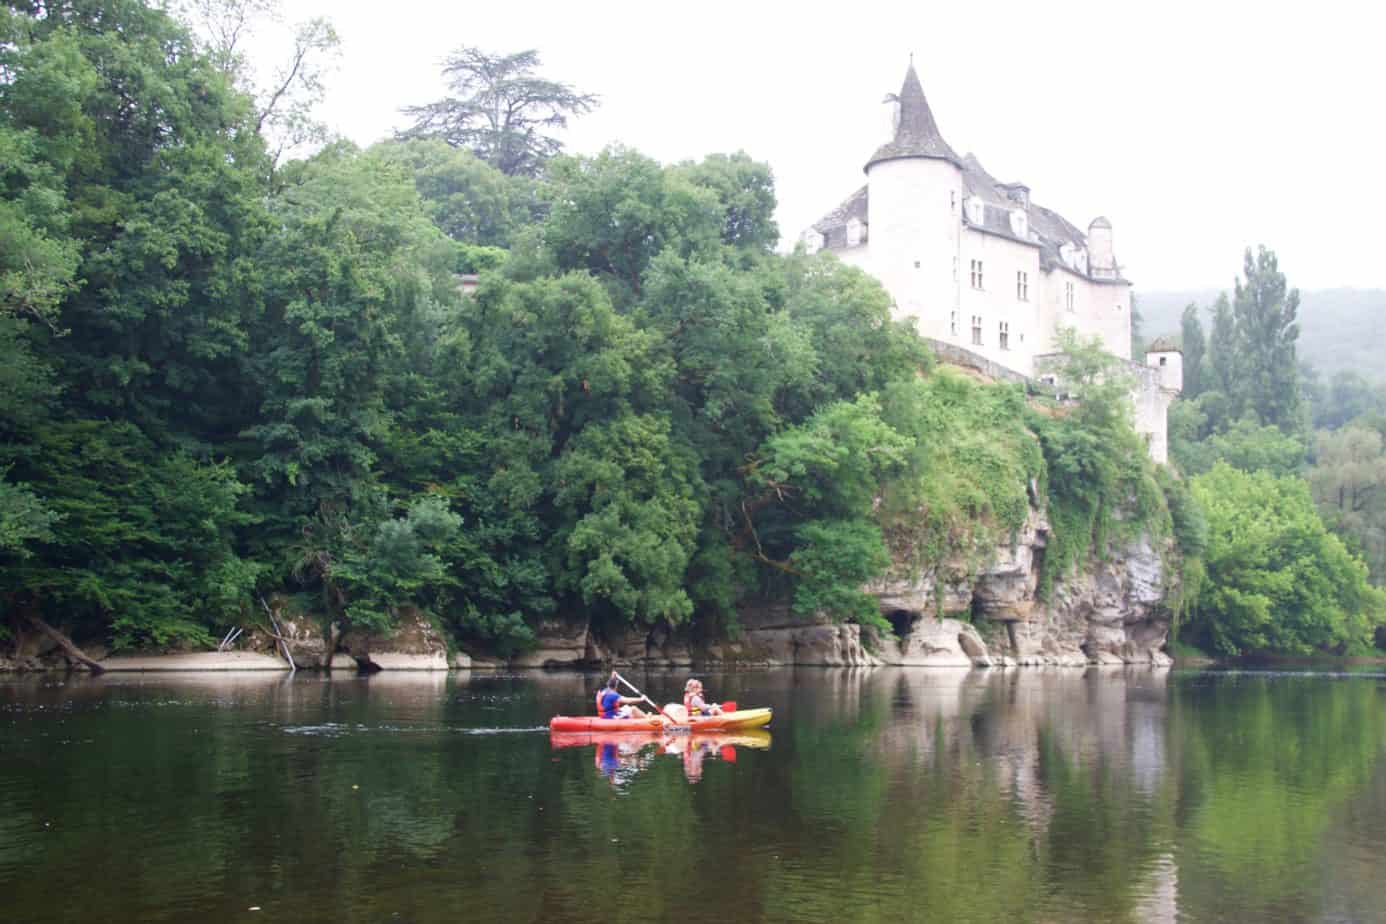 Image of Châteaux de la Treyne with people canoeing in front of it.